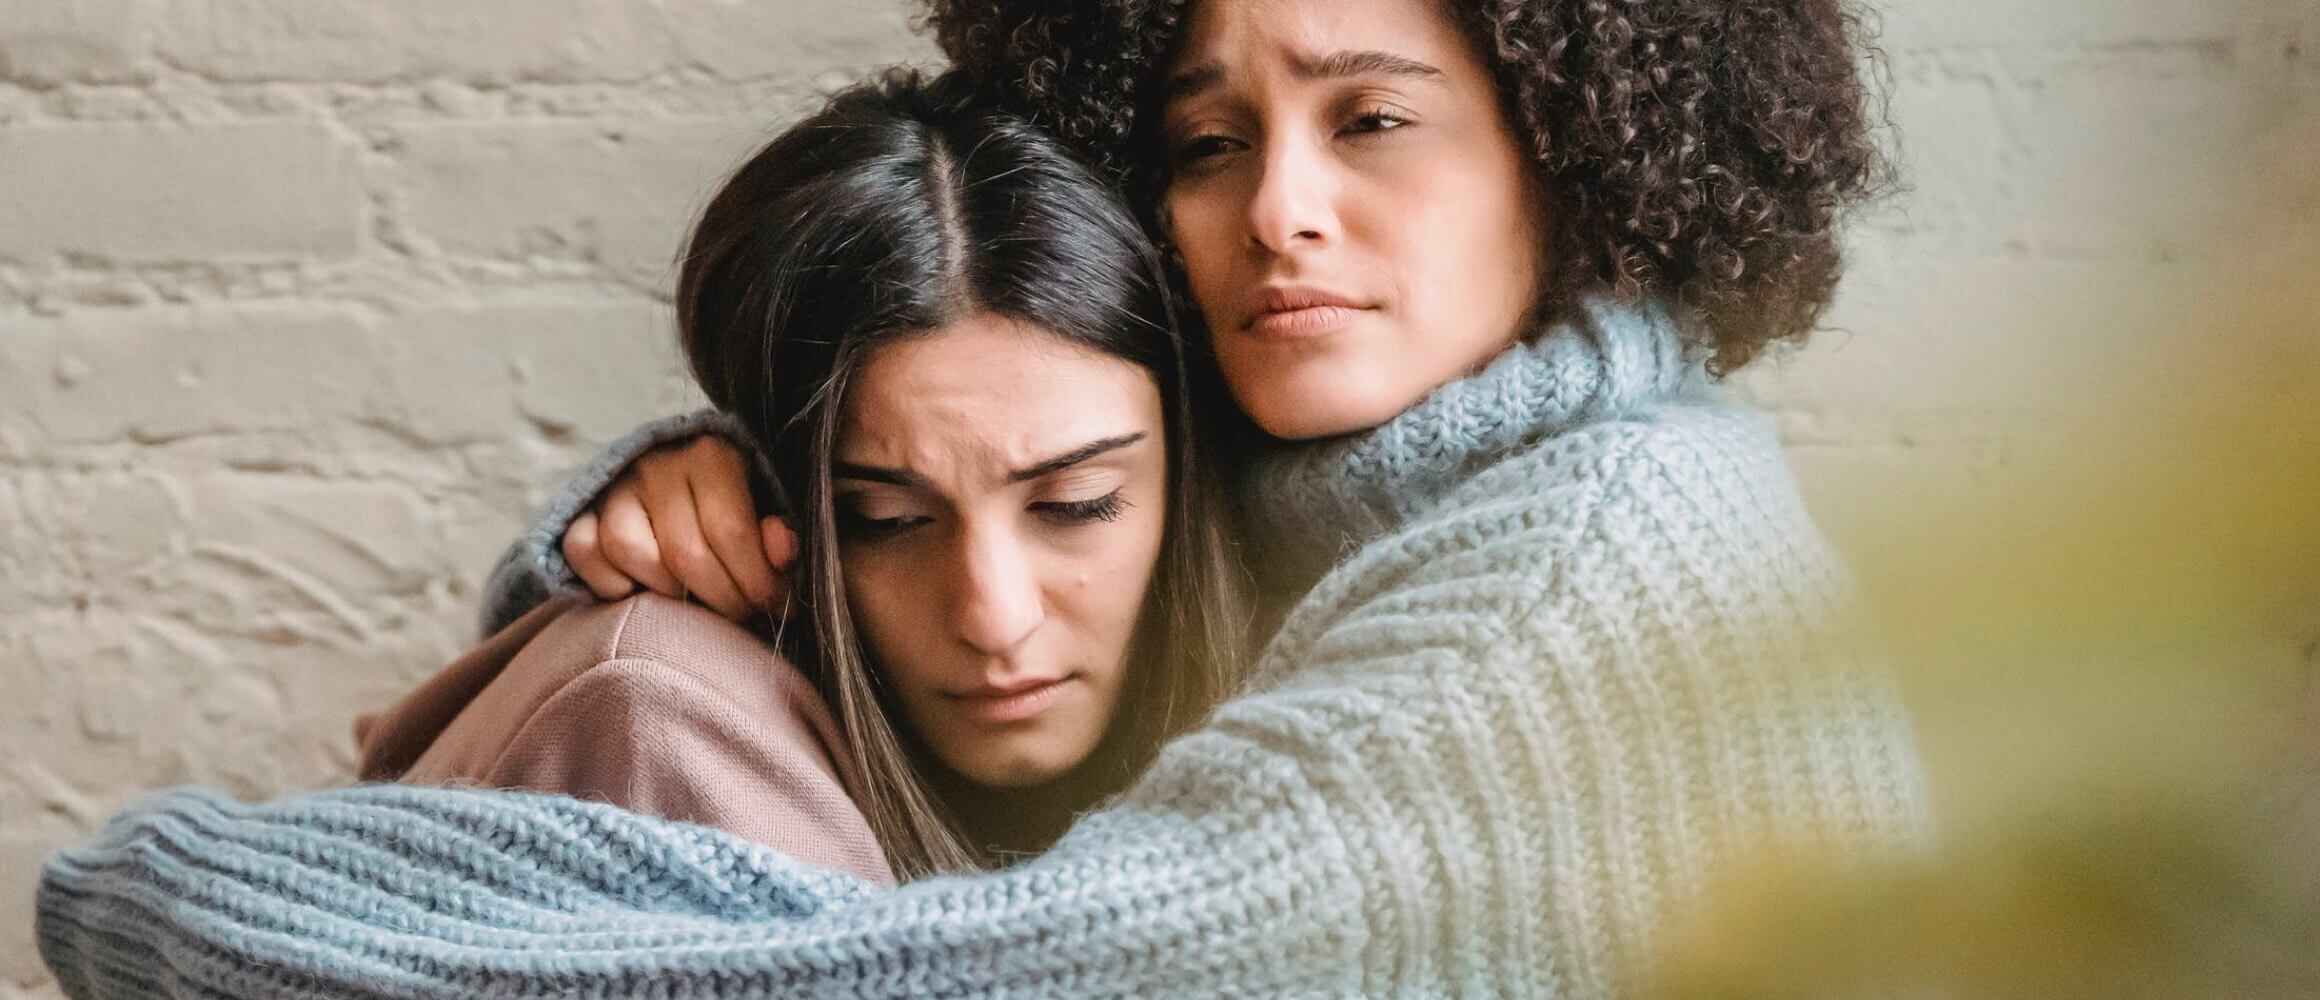 Two women looking dissapointed